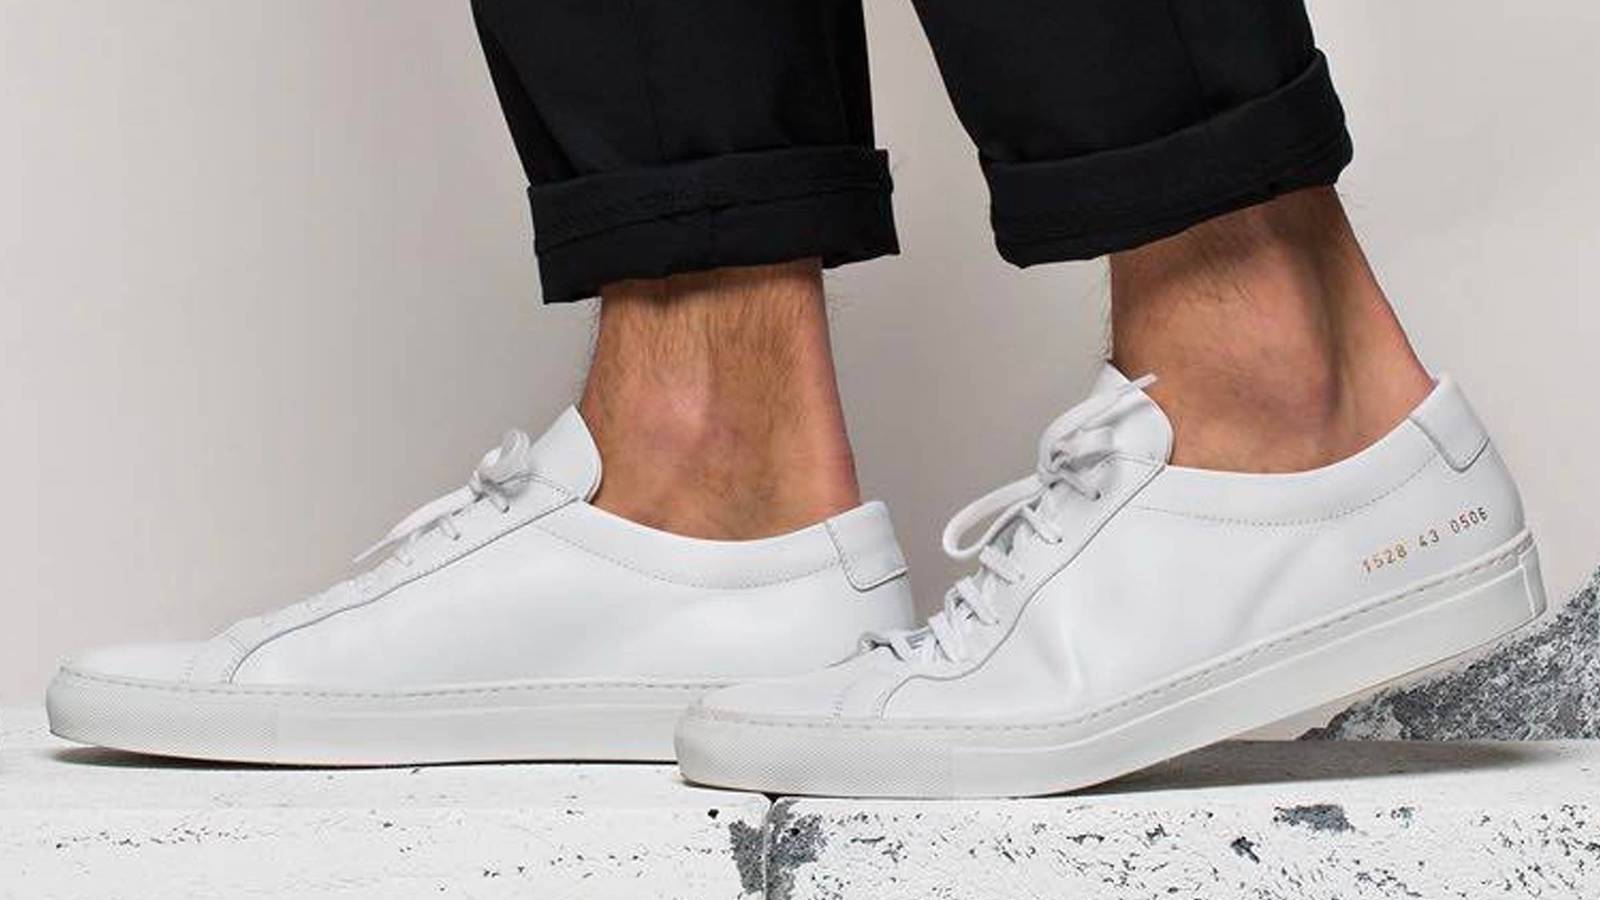 White-rimmed sneakers are taking over our streets, British GQ